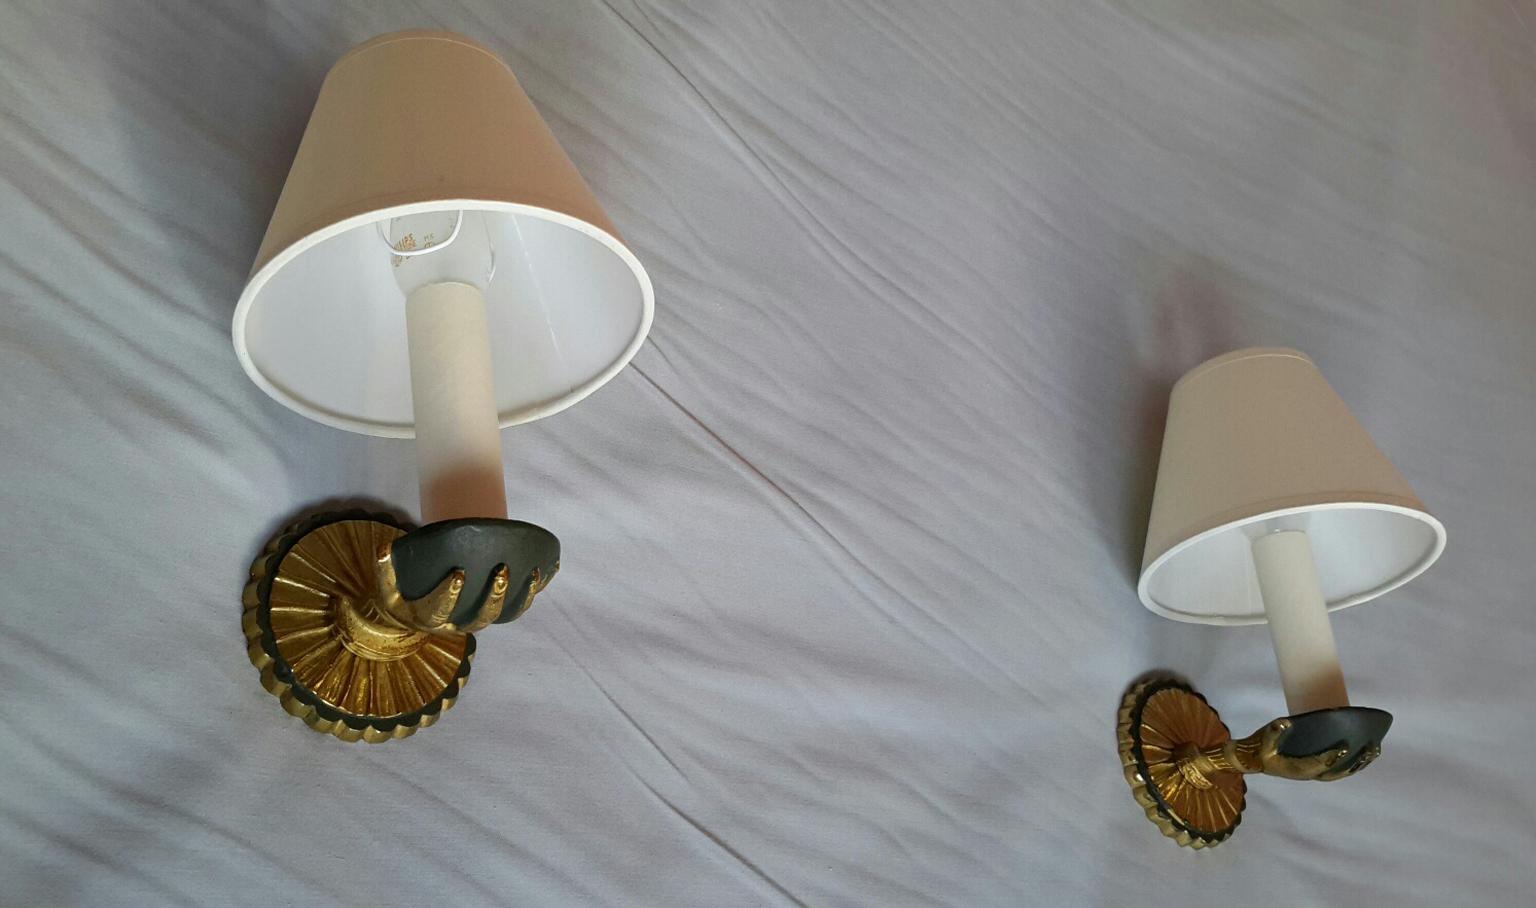 Beautiful and original pair of neoclassical gilt bronze sconces and antique green patina with white ivory cotton lampshades representing a child hands in the style of Maison Baguès / Jansen, France, 1950s.

In an excellent original condition and a